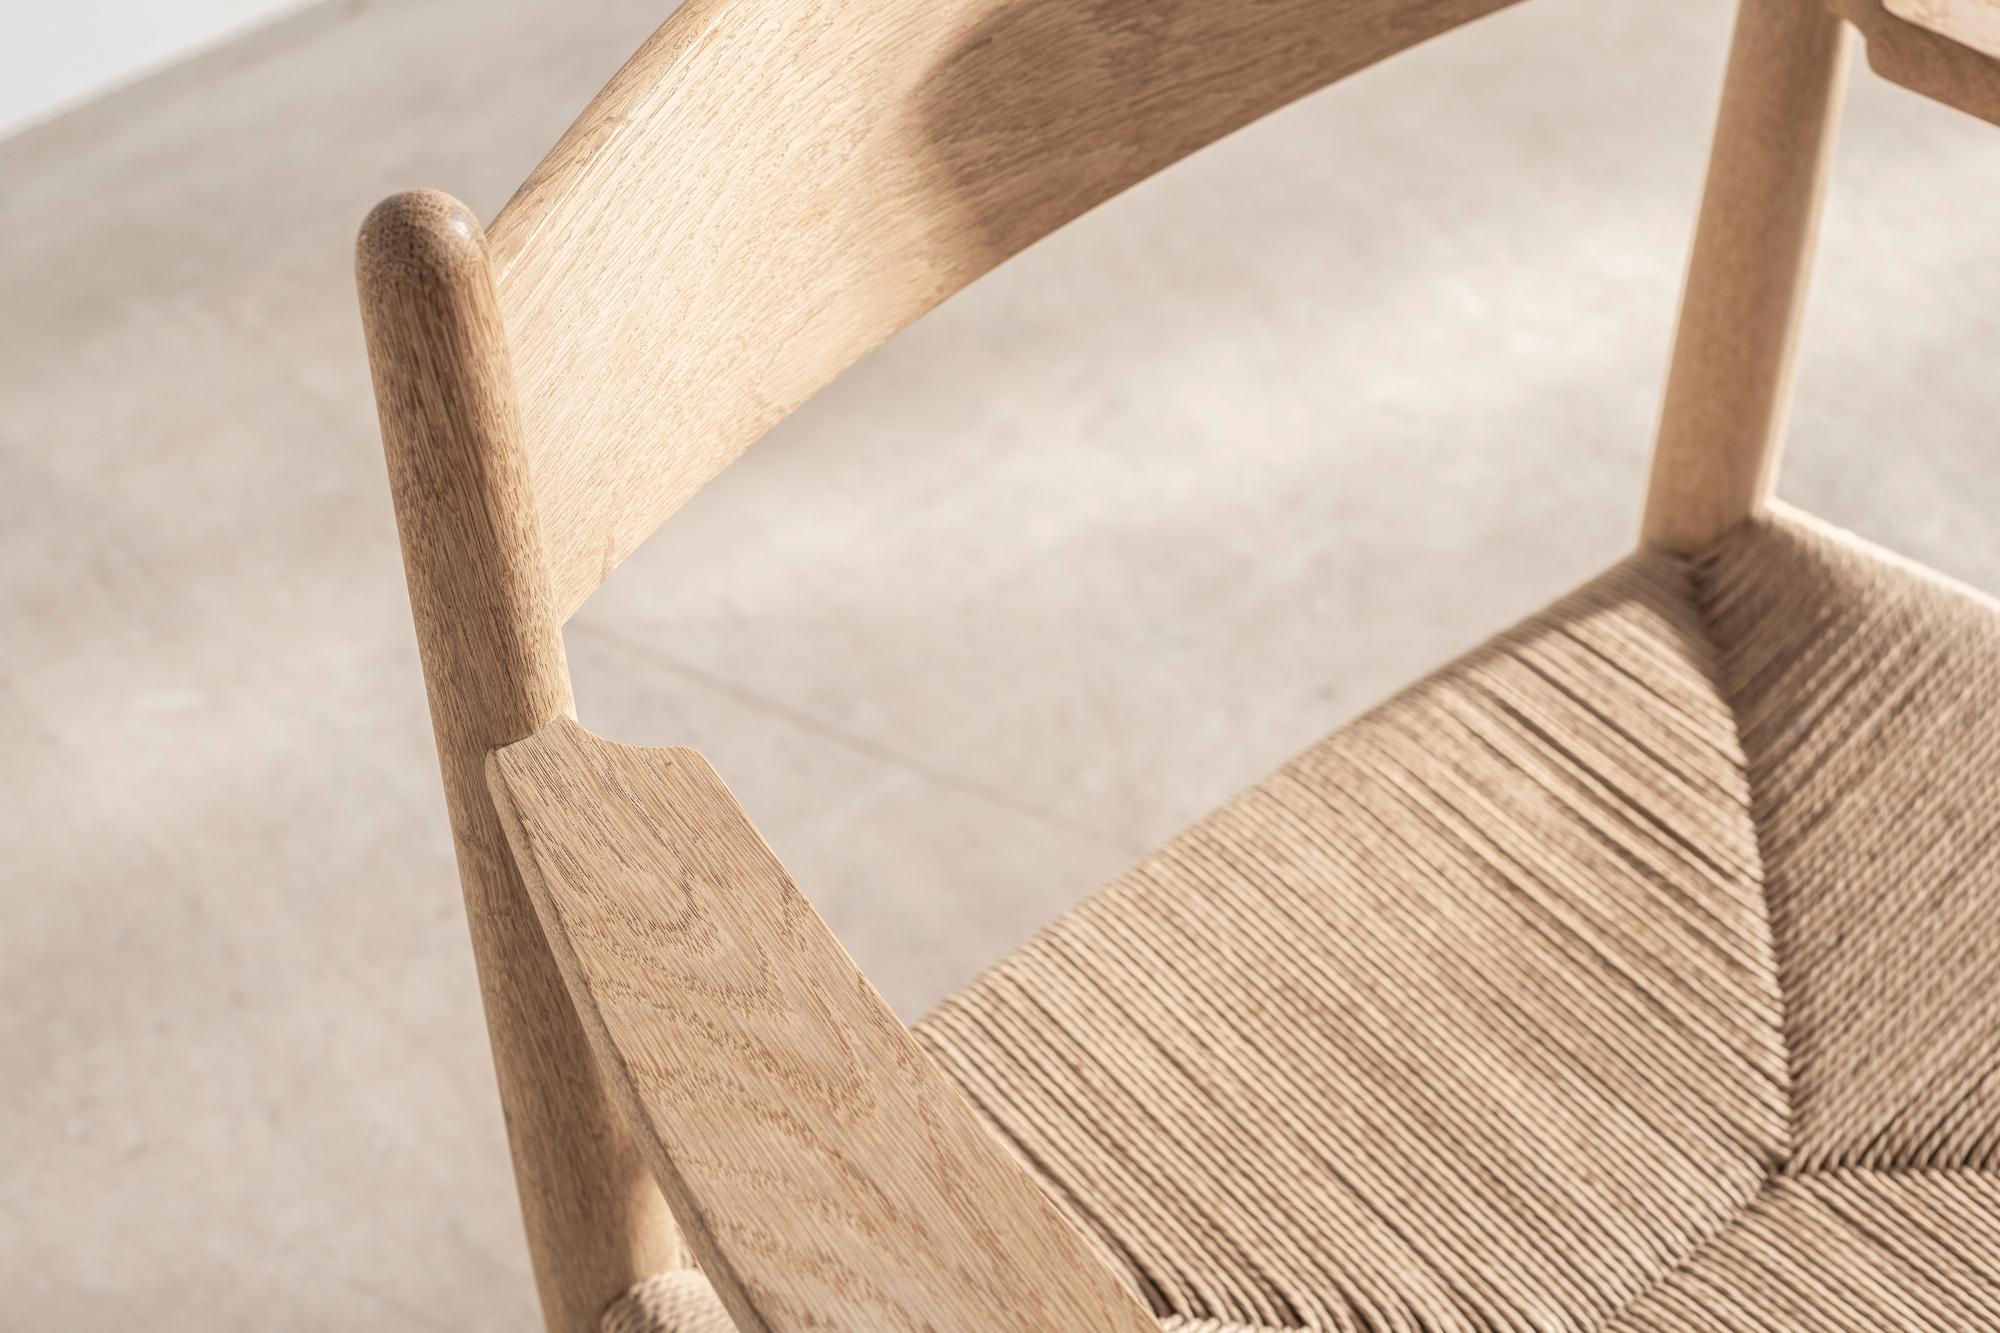 CH37 Chair in Oak with Natural Paper Cord by Hans Wegner 1